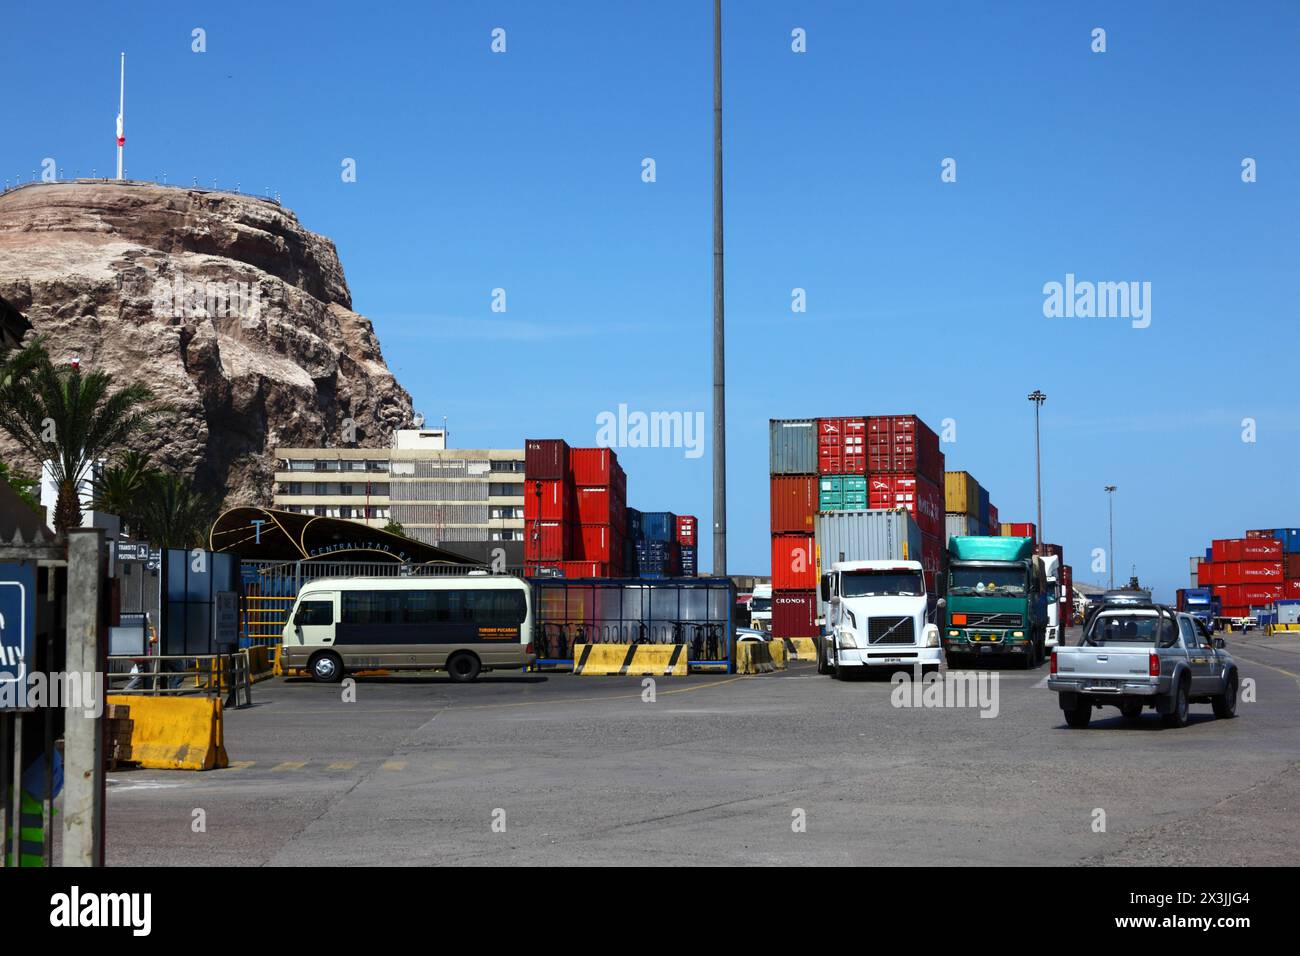 Trucks and containers stacked up in container port, El Morro headland on left hand side, Arica, Chile Stock Photo